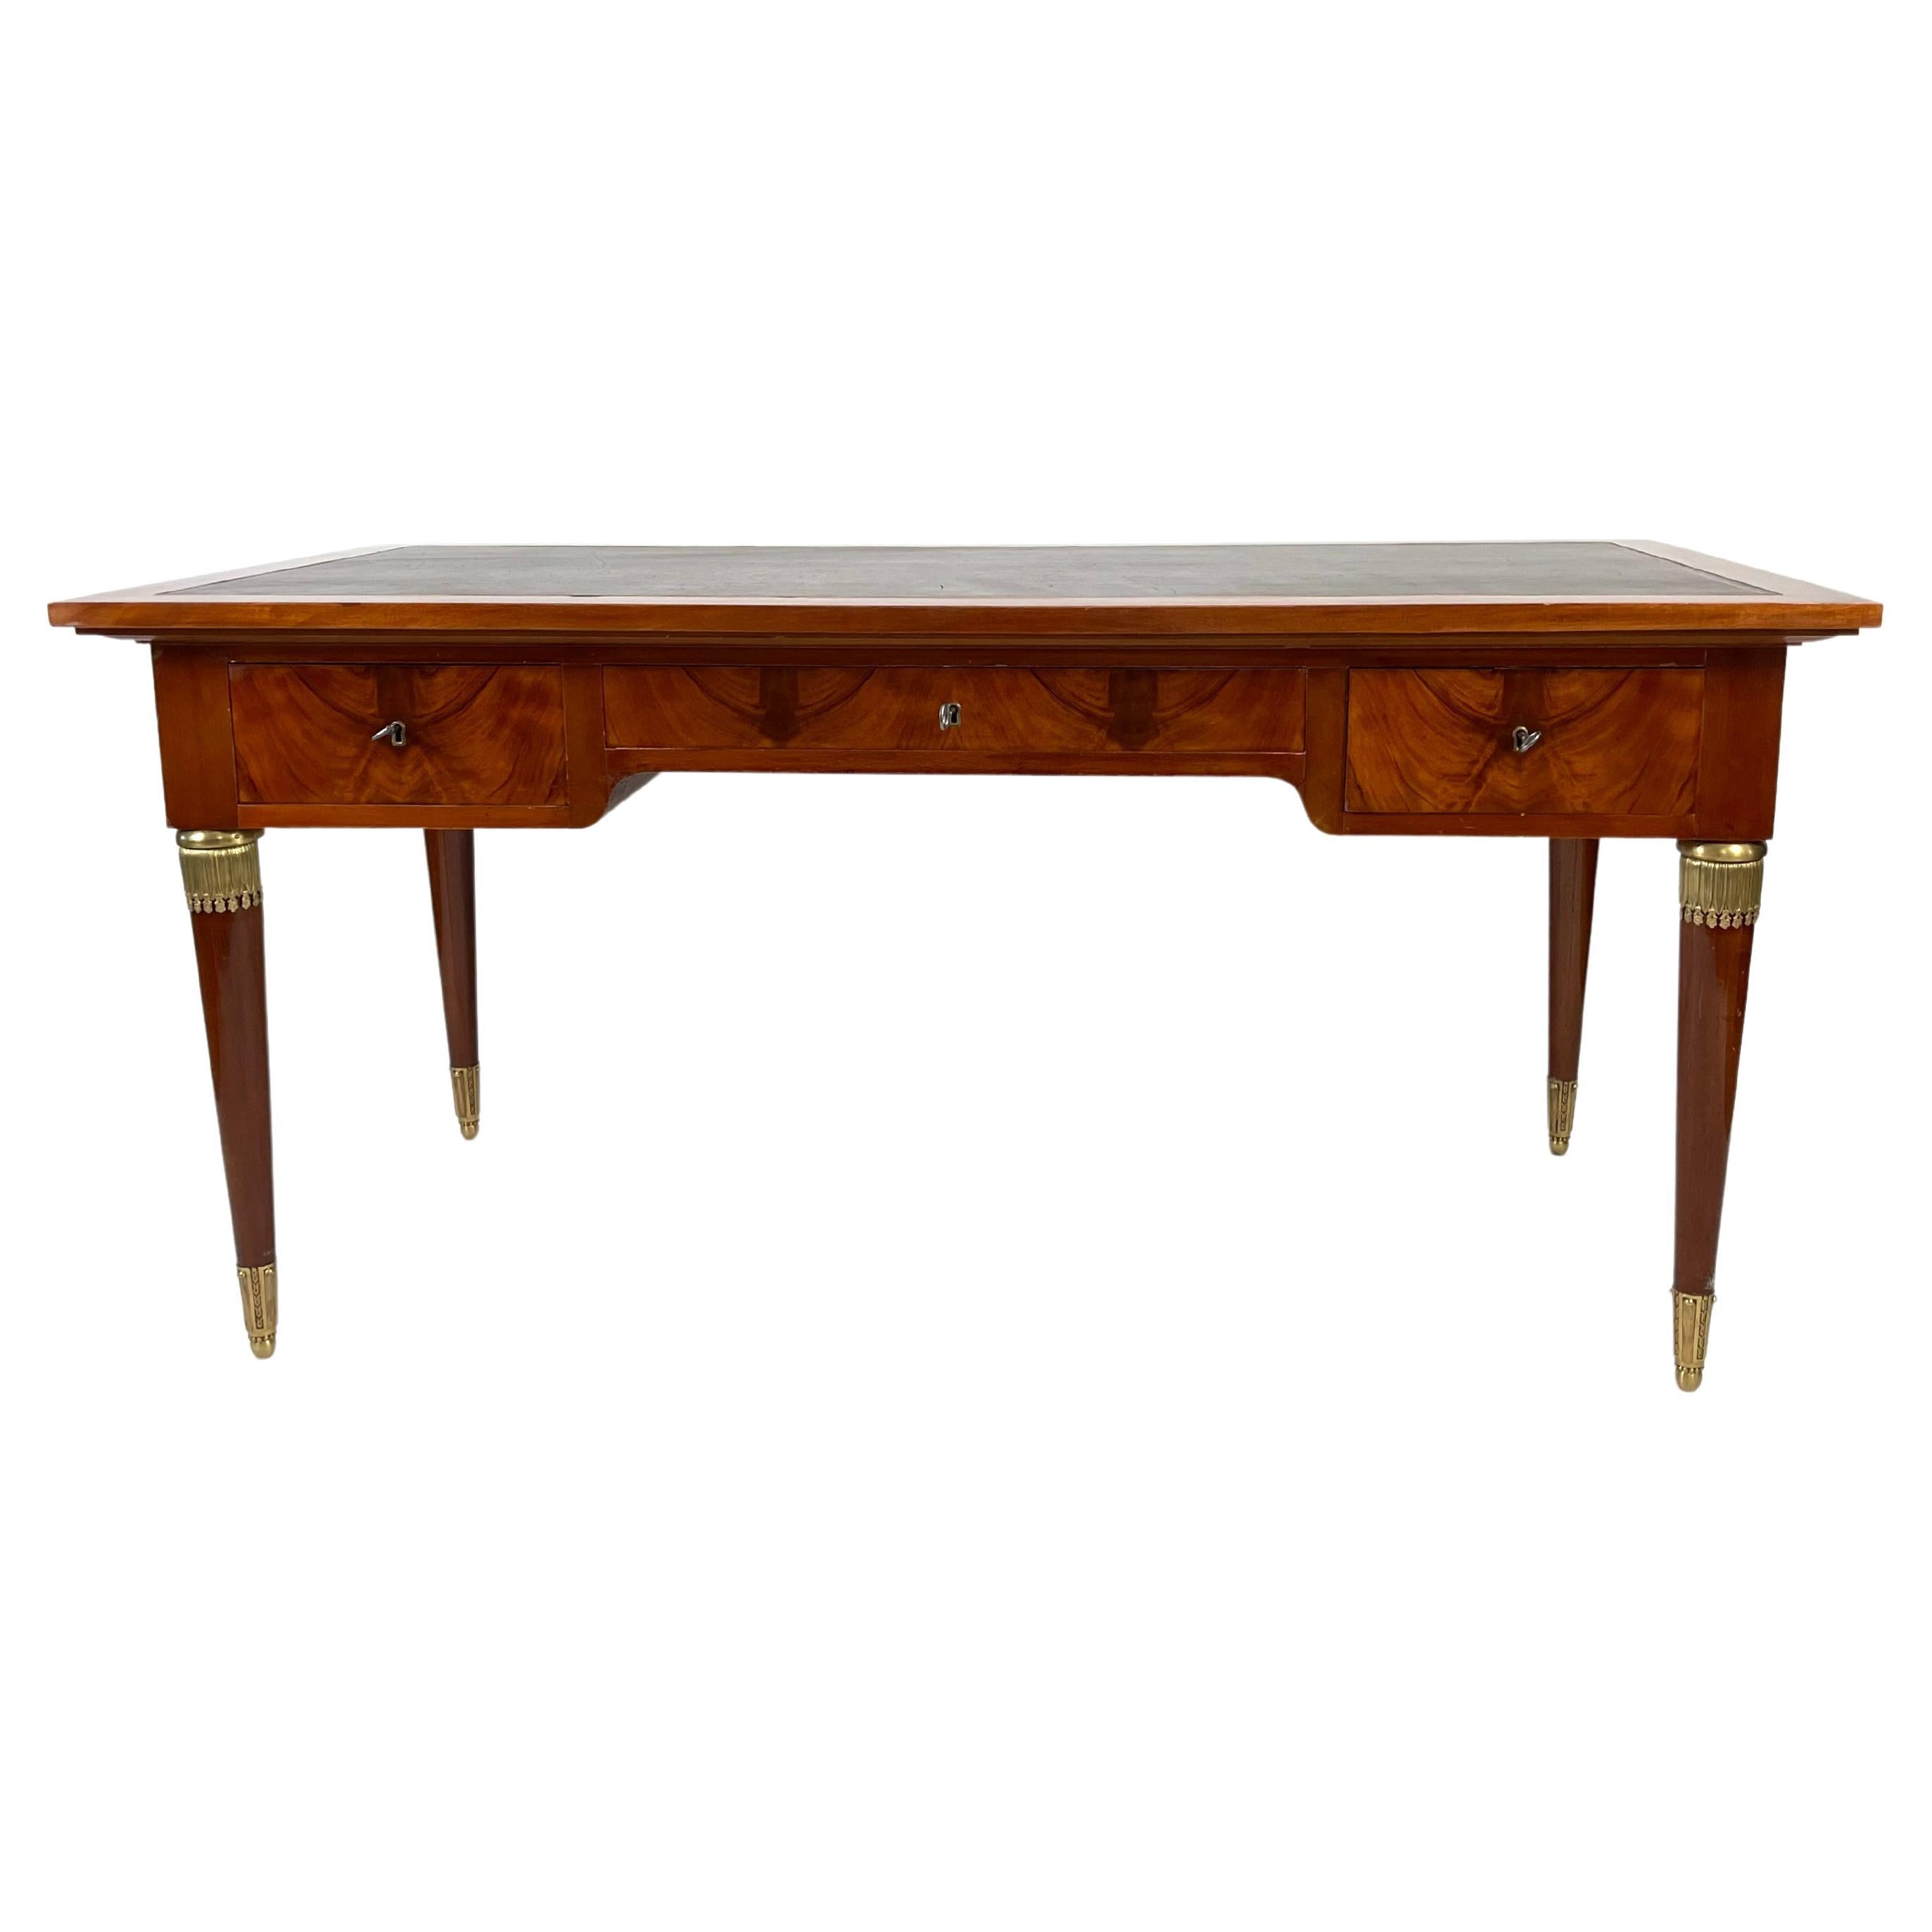 French Neoclassical Empire Style Mahogany Leather Top Desk